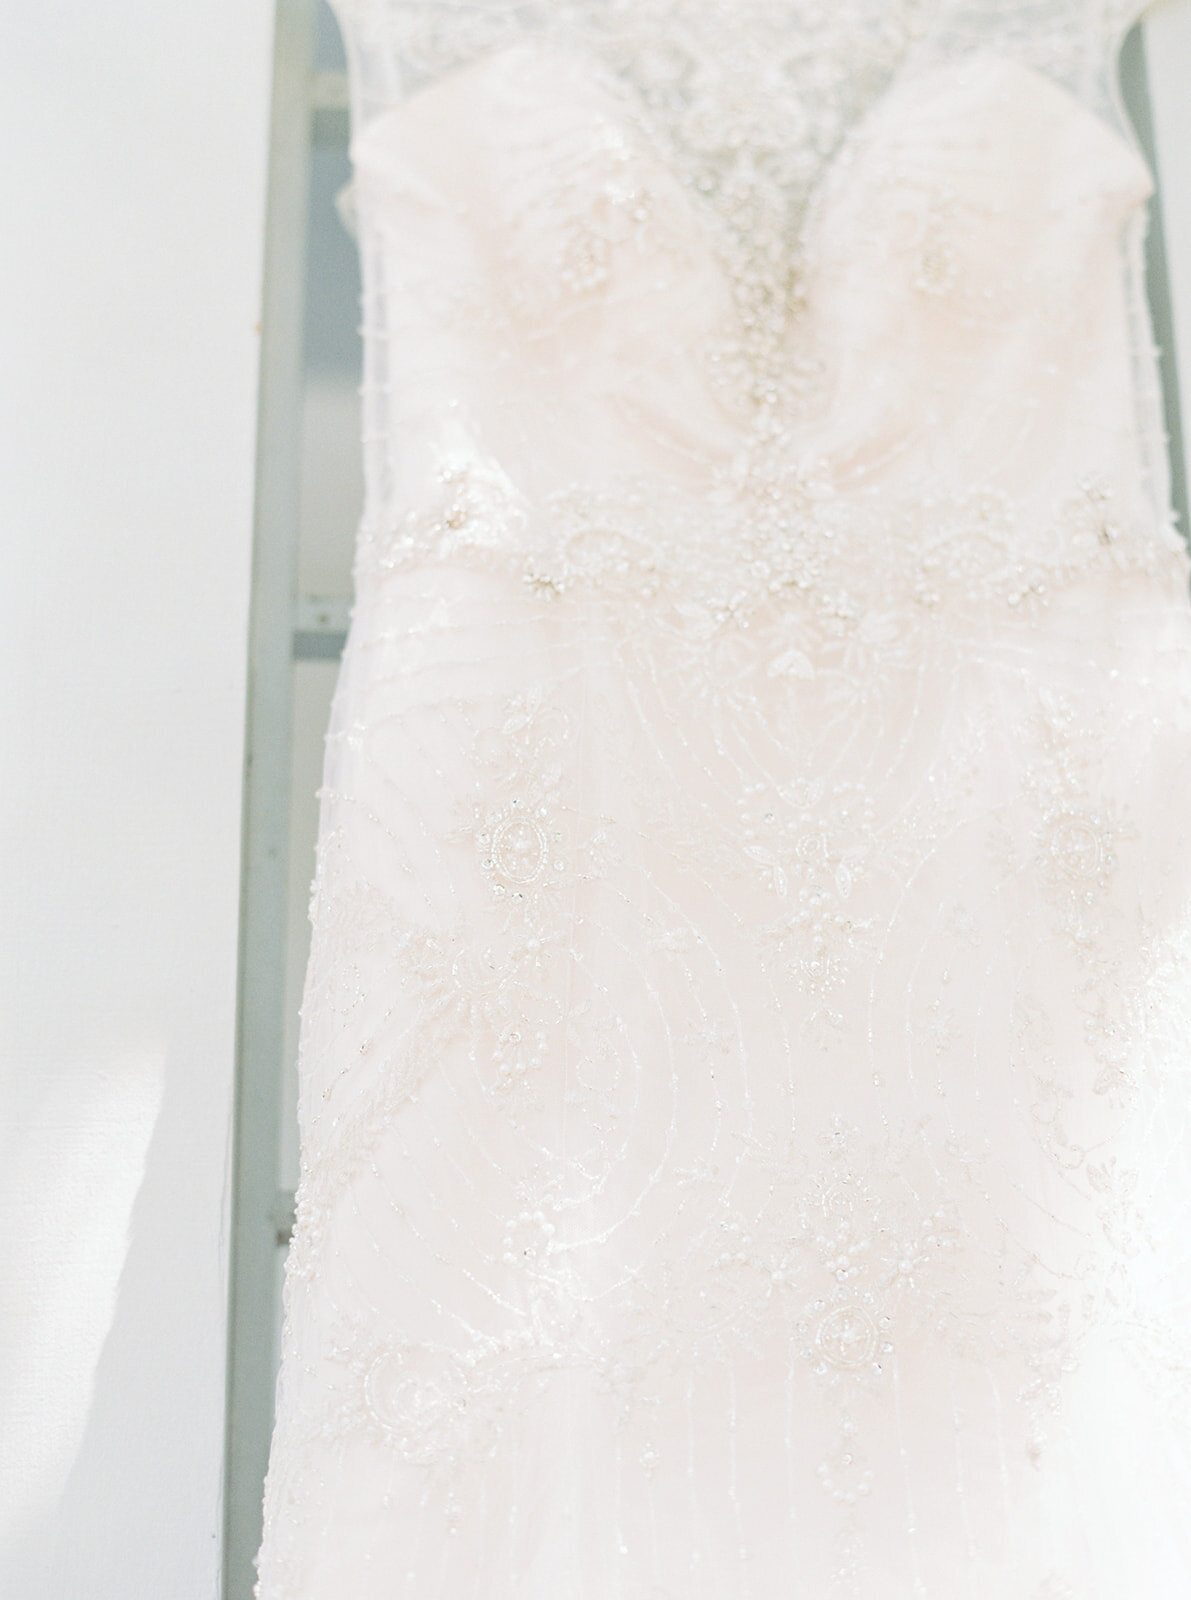 close up of wedding dress with lace